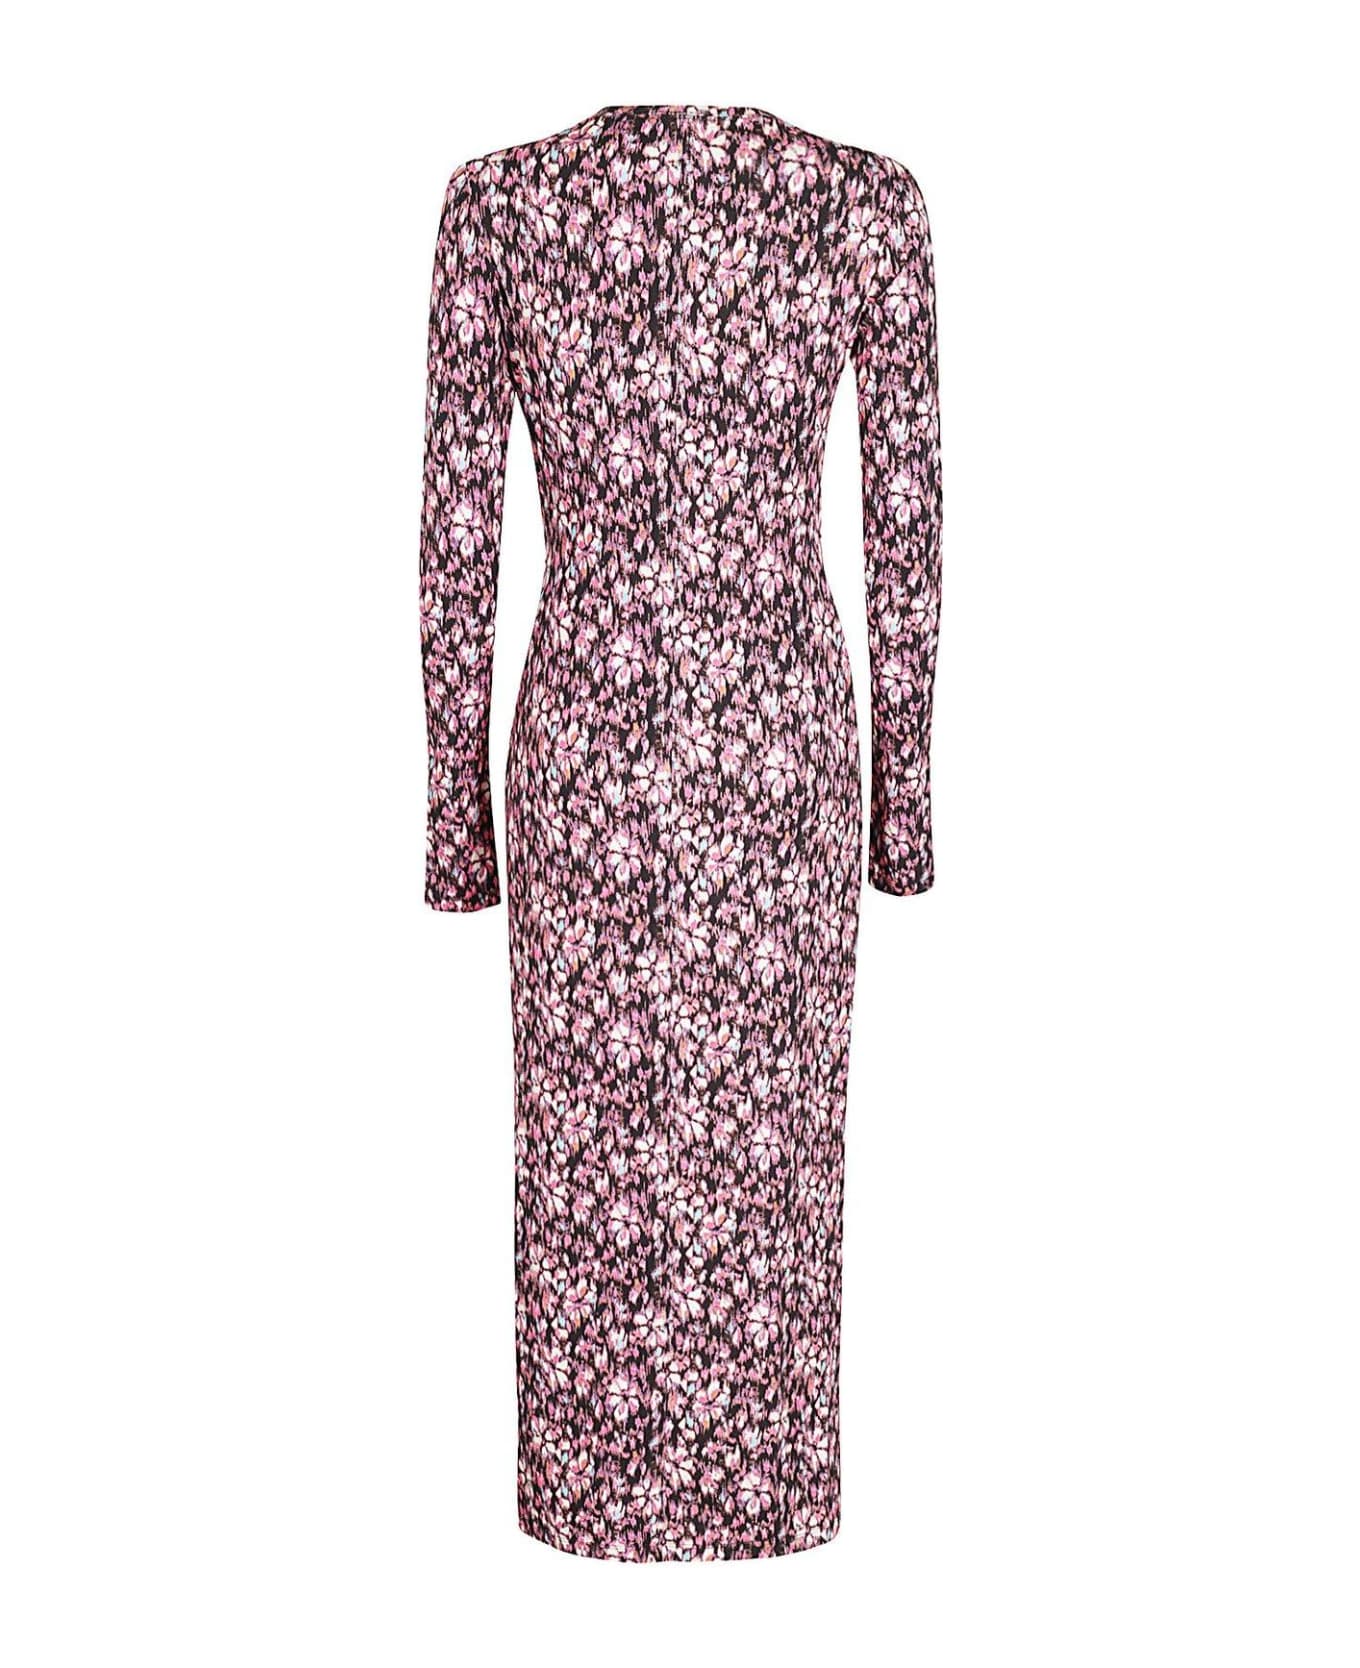 Isabel Marant Lisy Graphic-printed Knot Detailed Midi Dress - Midnight/pink